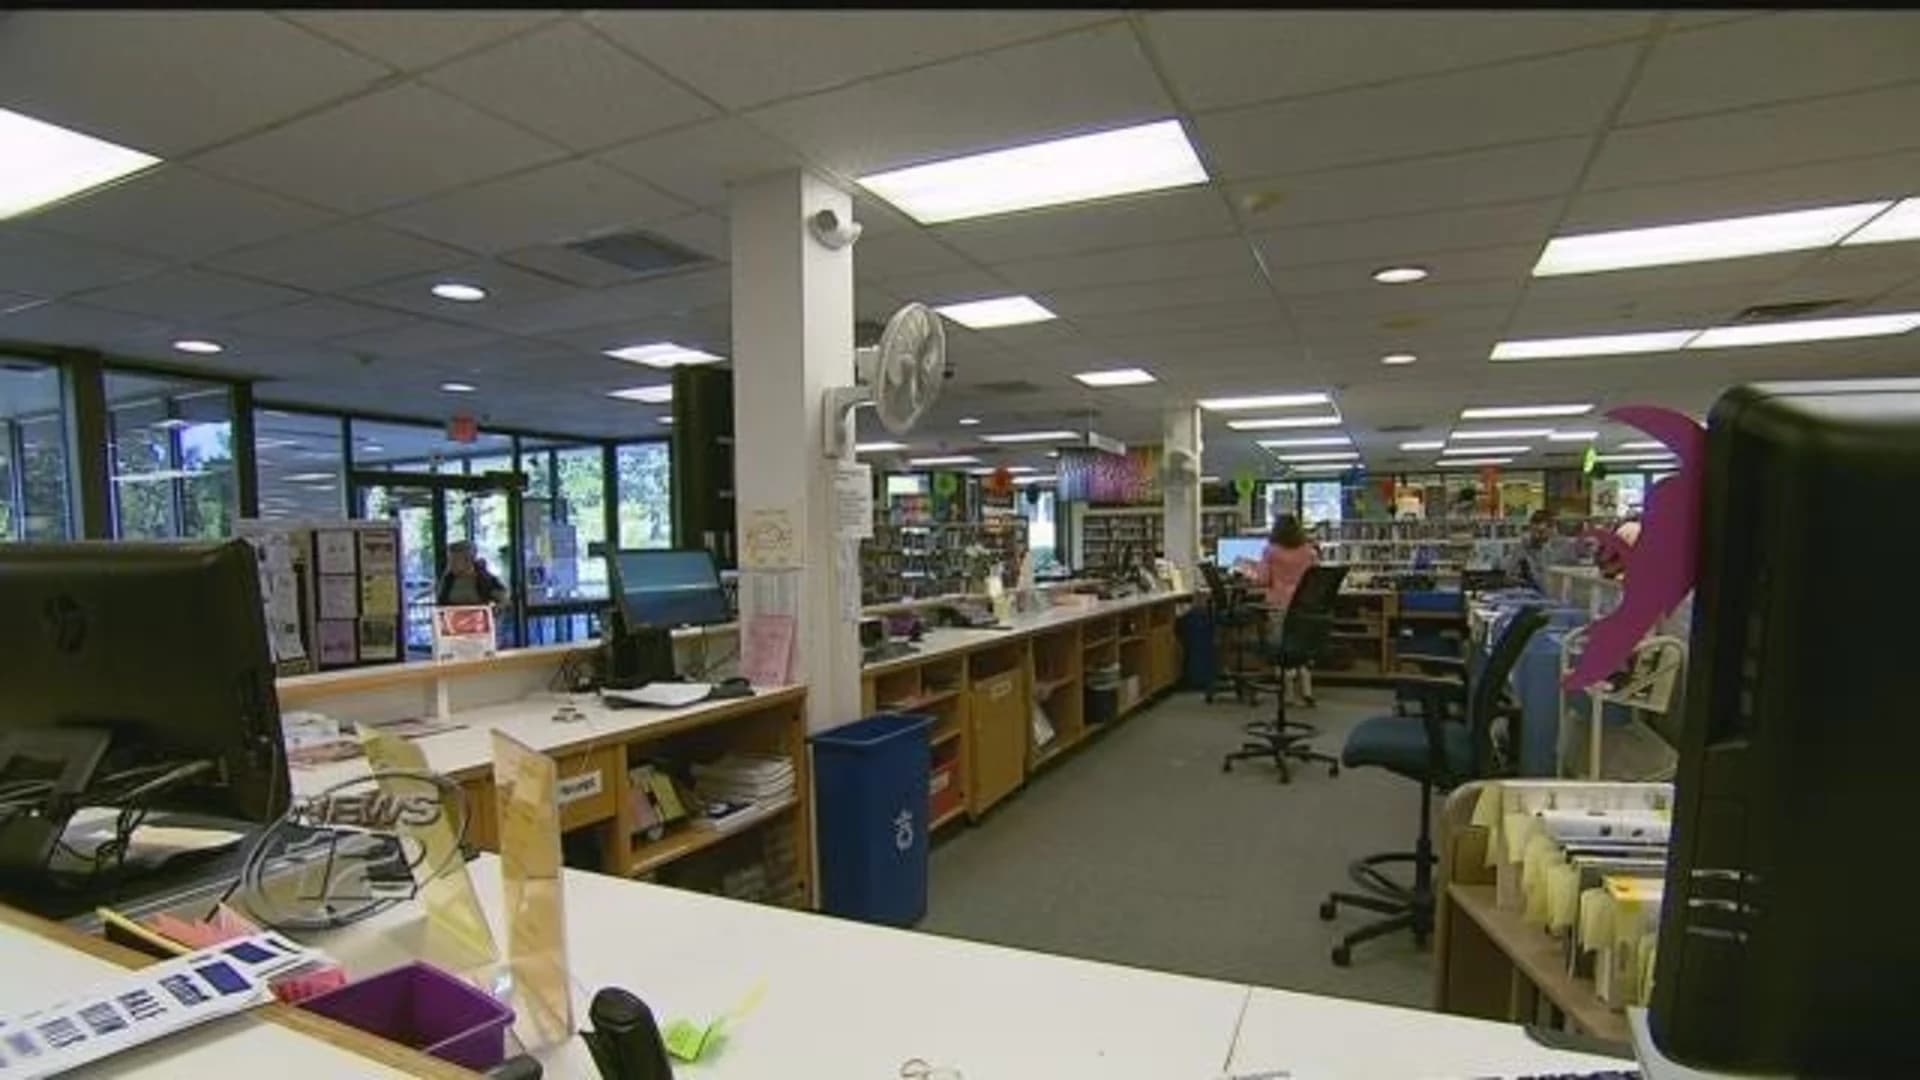 Taxpayers asked to cover part of Suffolk library renovation